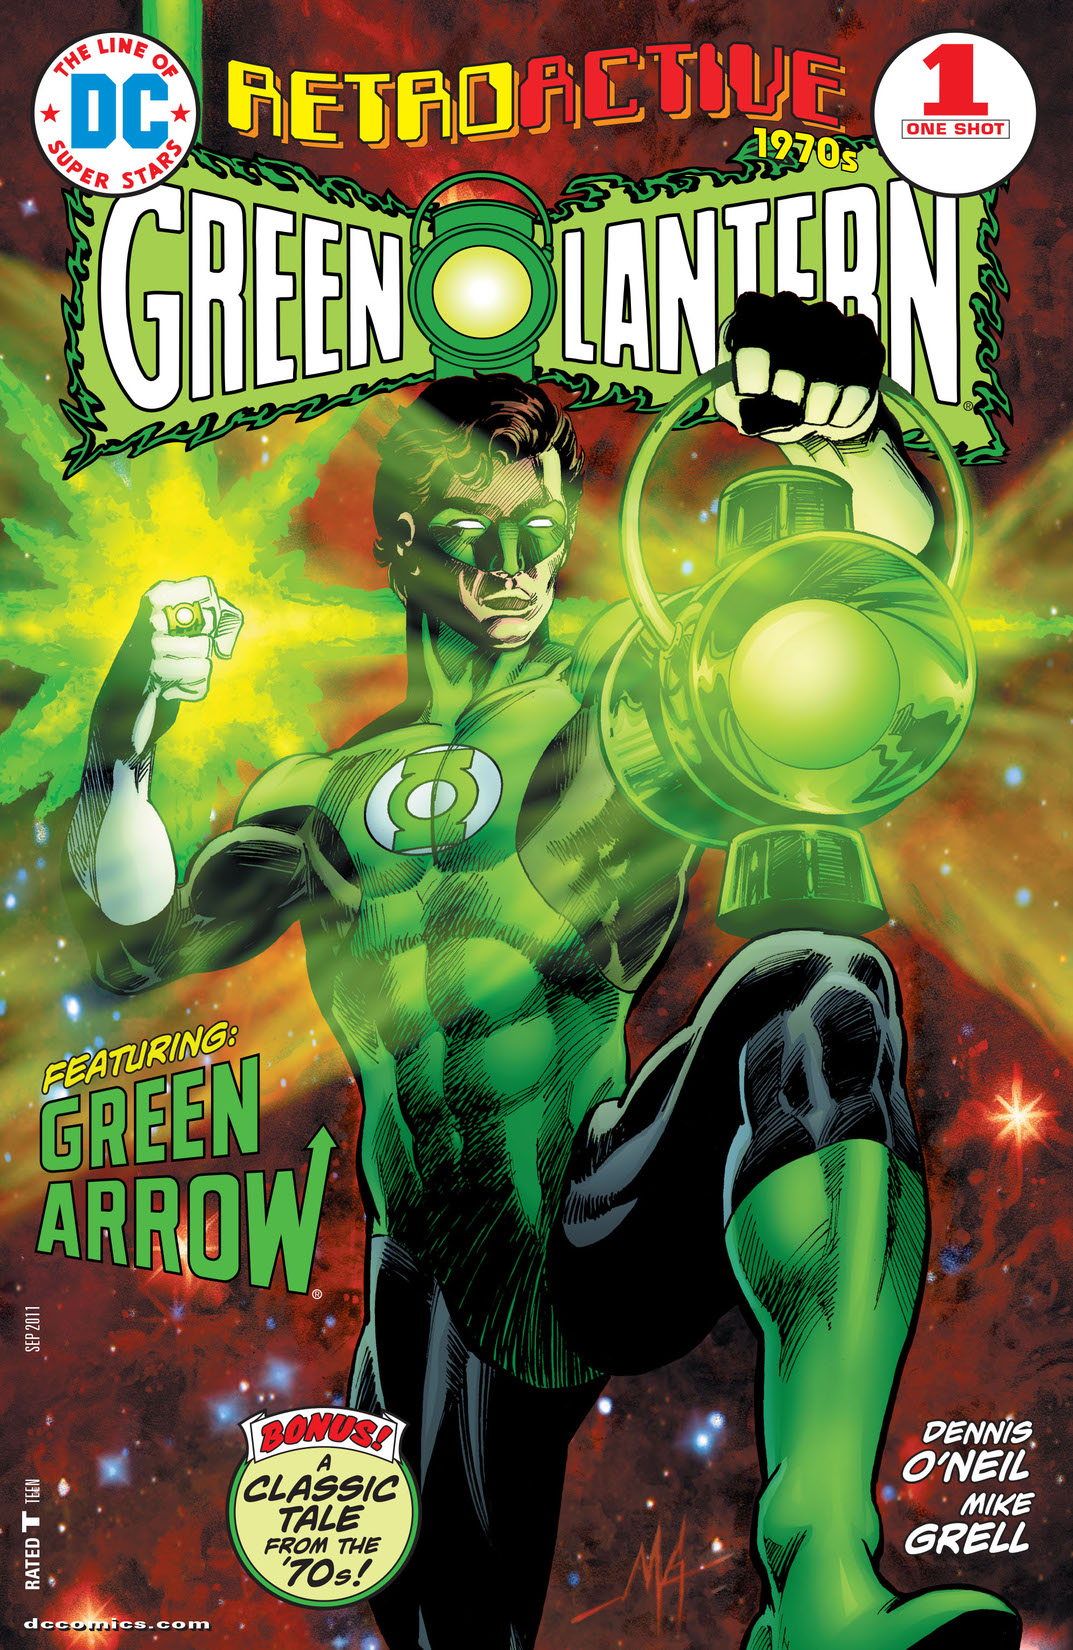 DC Retroactive: Green Lantern - The '70s #1 preview images